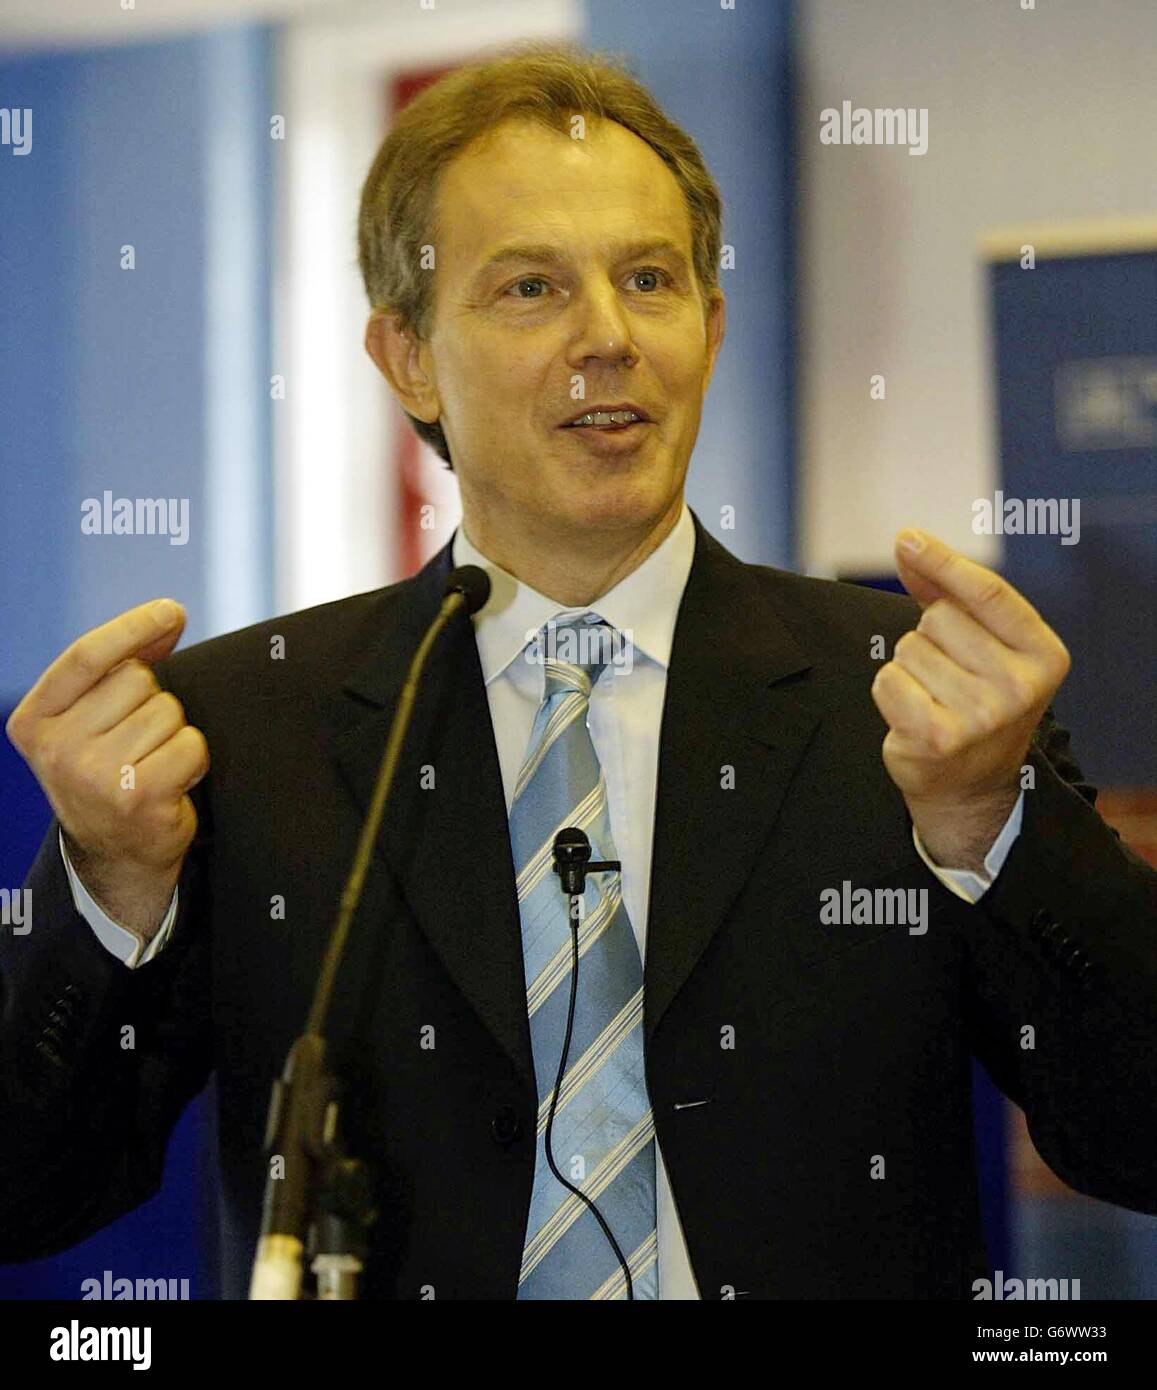 Prime Minister Tony Blair speaks during a visit to the community centre in the Stone Bridge Estate in North West London. Mr Blair was visiting the community centre to promote a local police initiative for safer communities. Stock Photo